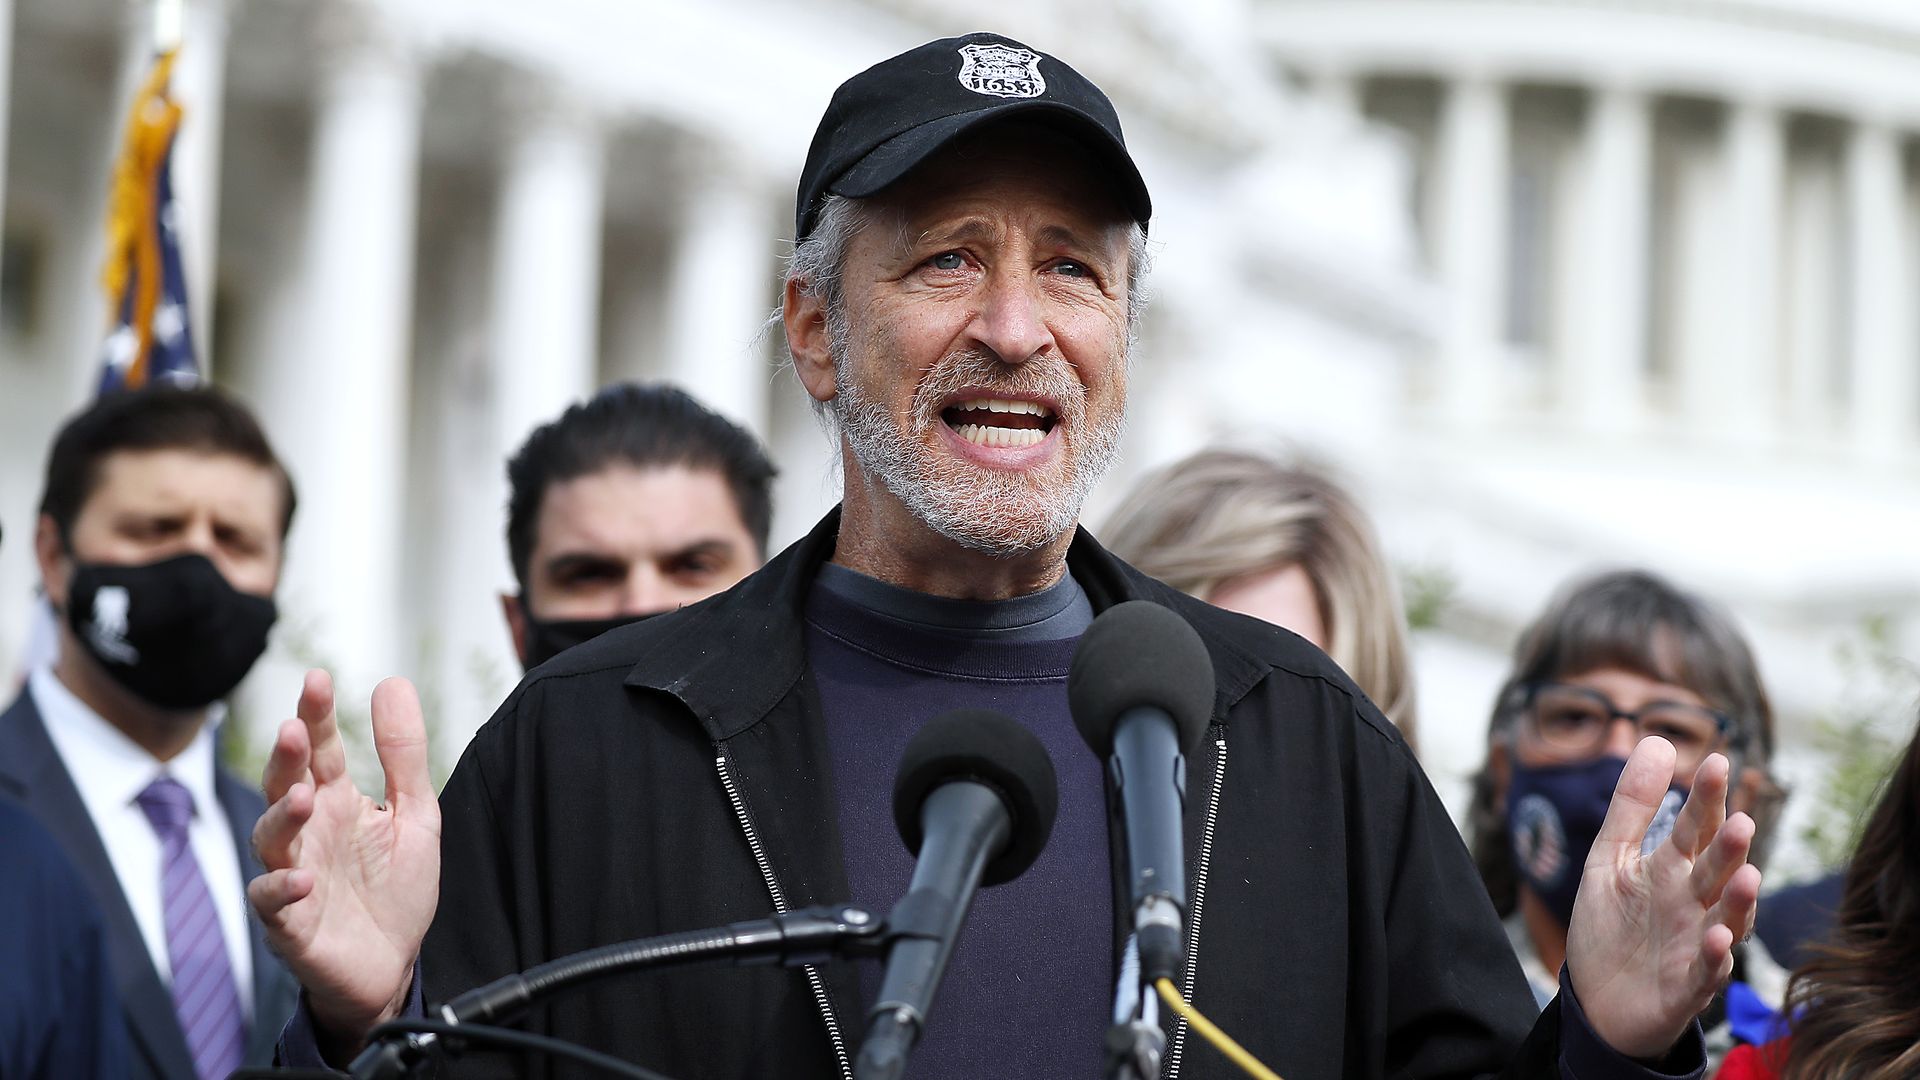  Jon Stewart speaks at a press conference oat the House Triangle on September 15, 2020 in Washington, DC. 